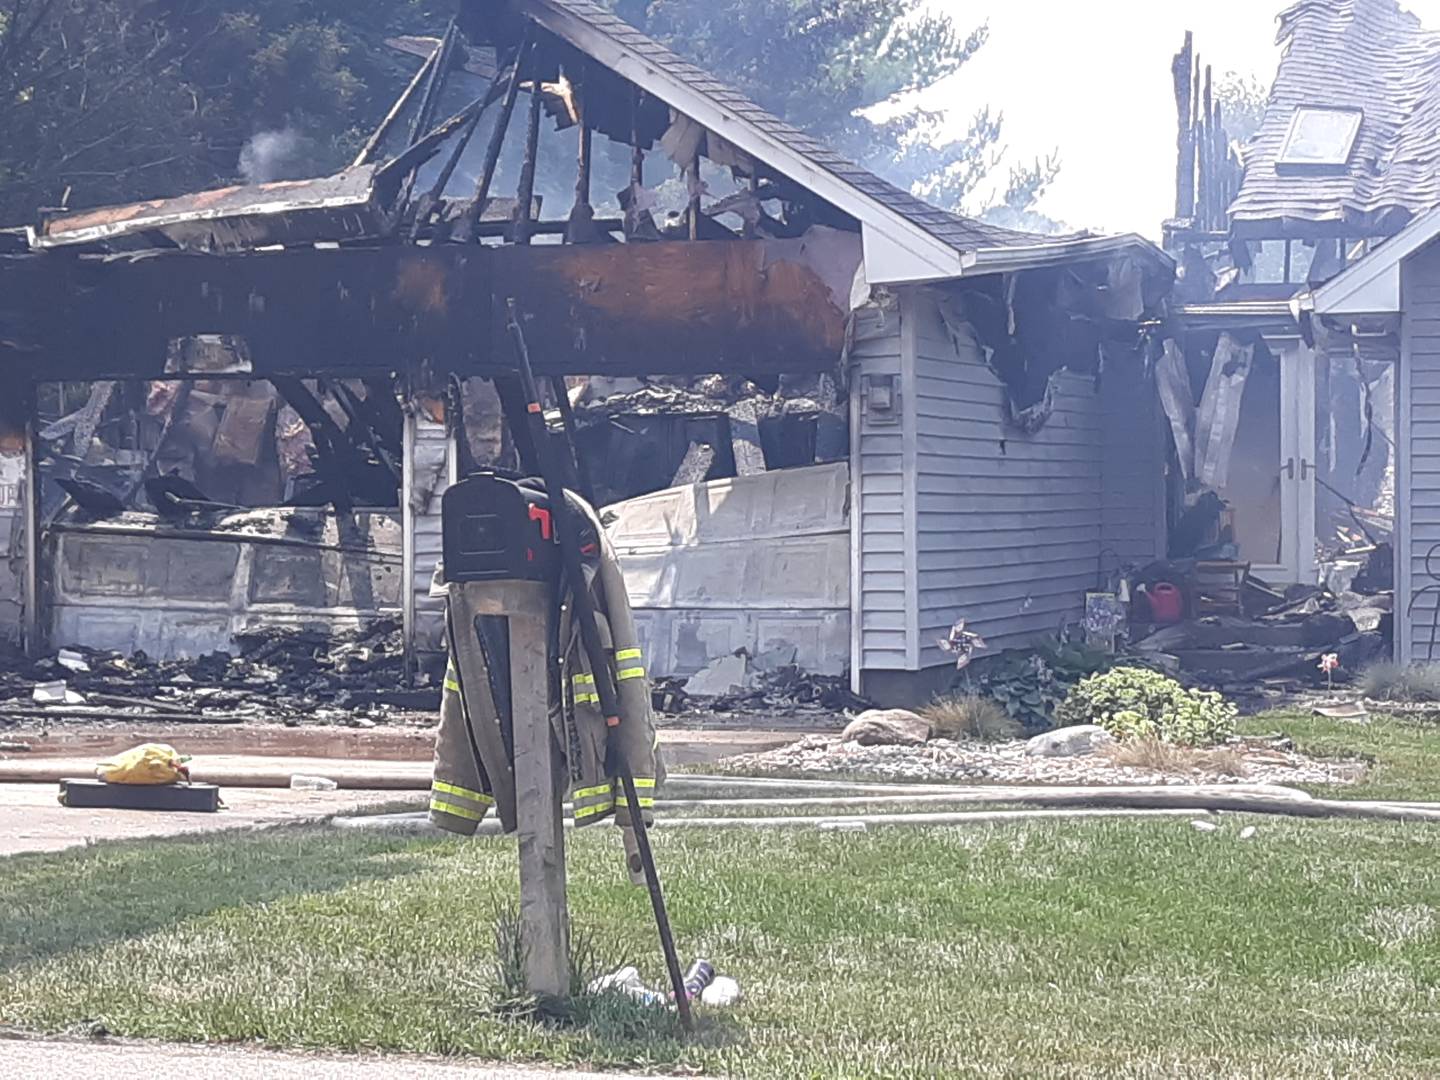 A structure fire on Saturday afternoon in Crystal Lake appears to have left a house a total loss.